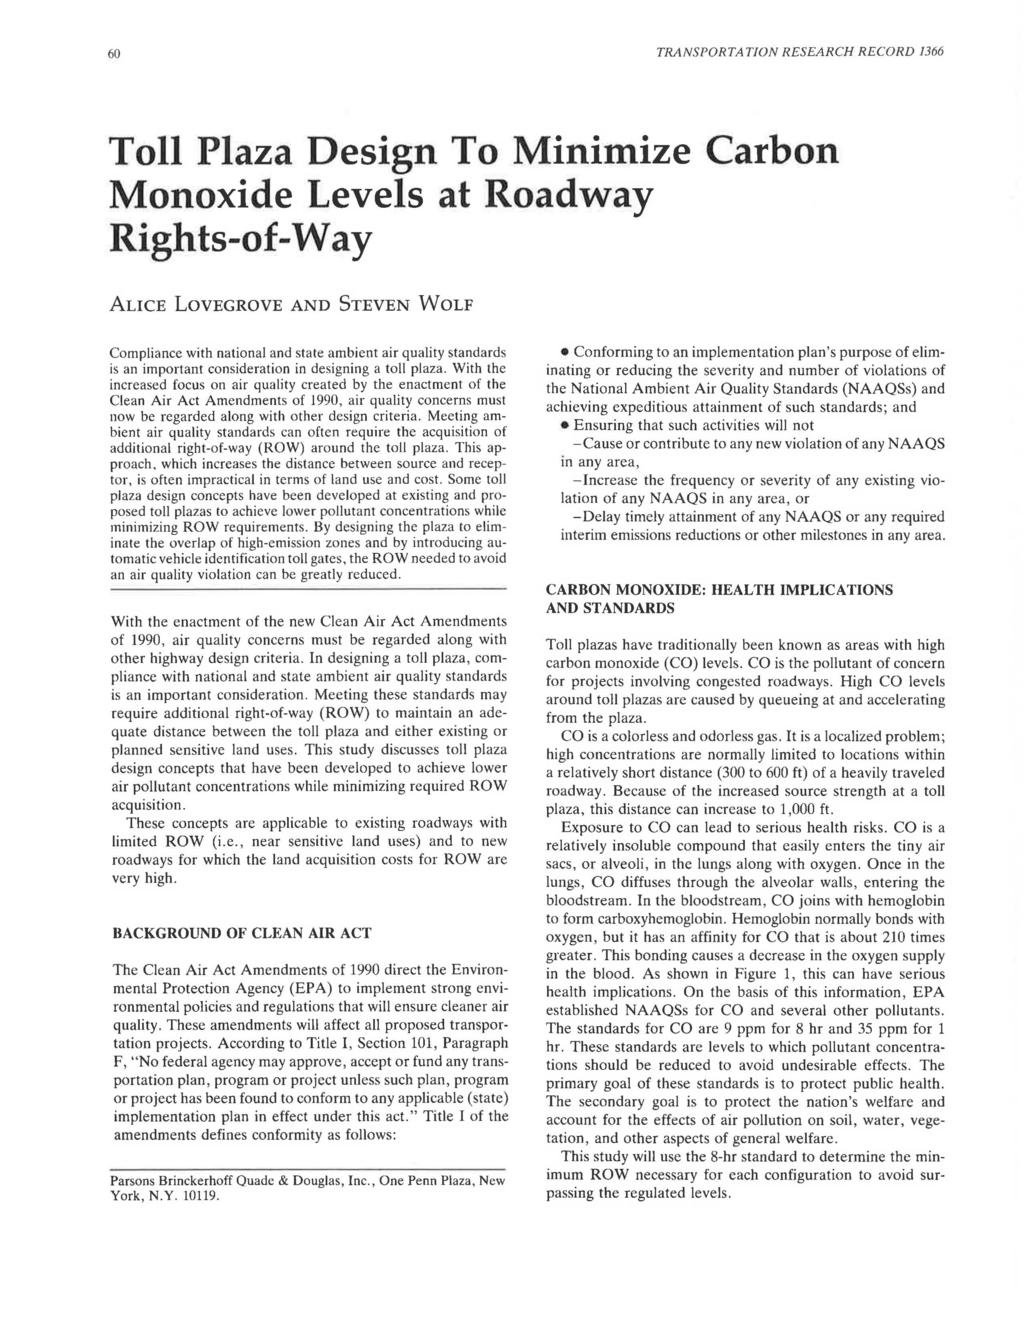 6 RANSPORAION RESEARCH RECORD 1366 oll Plaza Design o Minimize Carbon Monoxide evels at Roadway Rights-of-Way AICE OVEGROVE AND SEVEN WoF Compliance with national and state ambient air quality